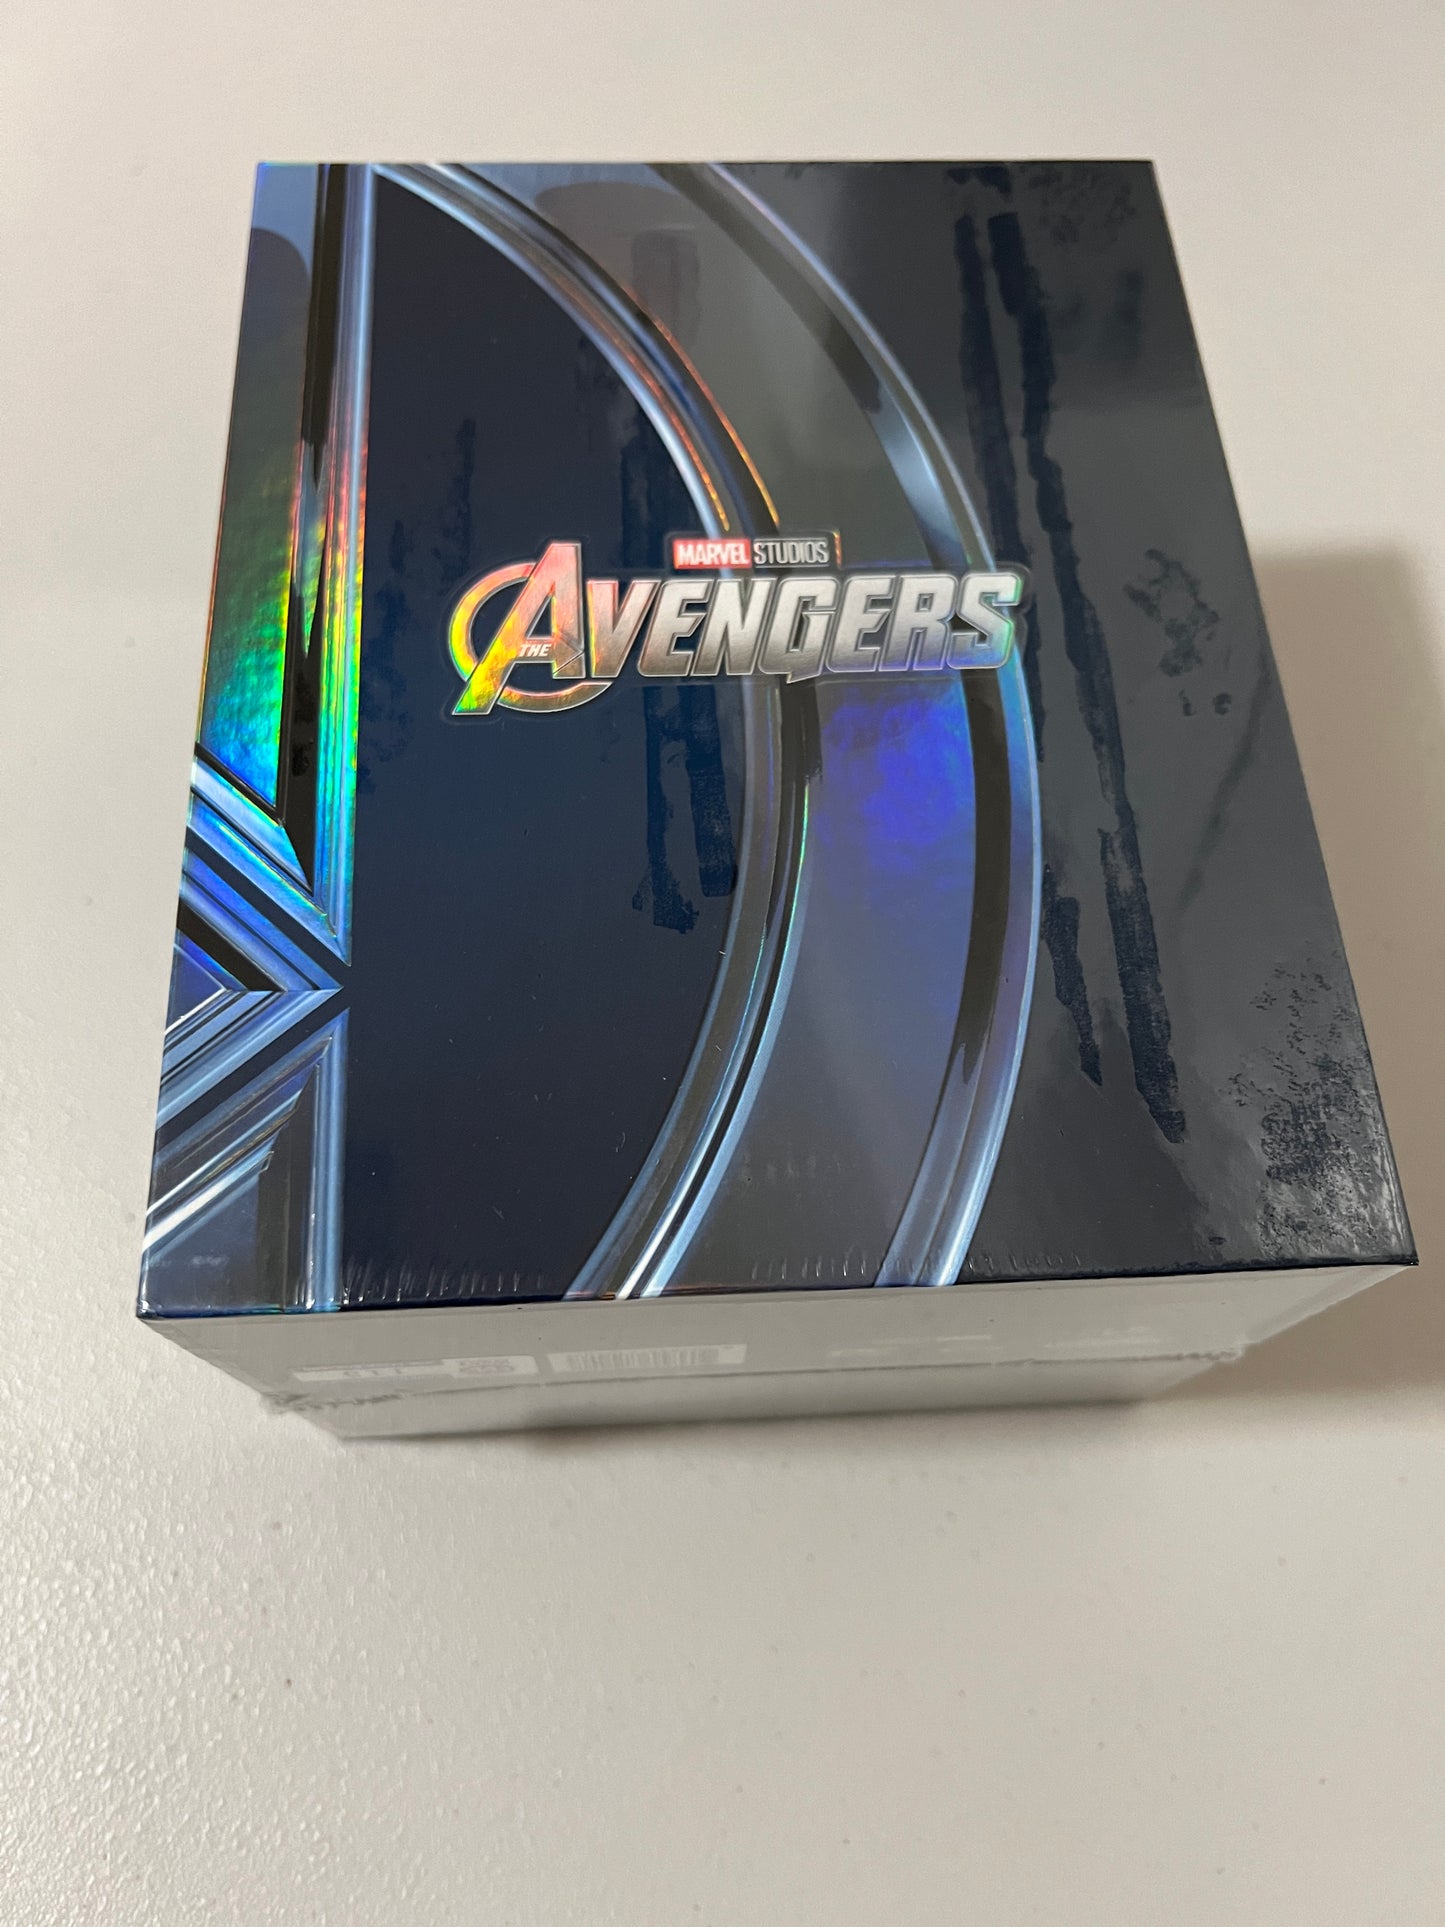 Avengers (4K+2D Blu-ray SteelBook) (WeET Collection Exclusive No.14) One Click Box Set